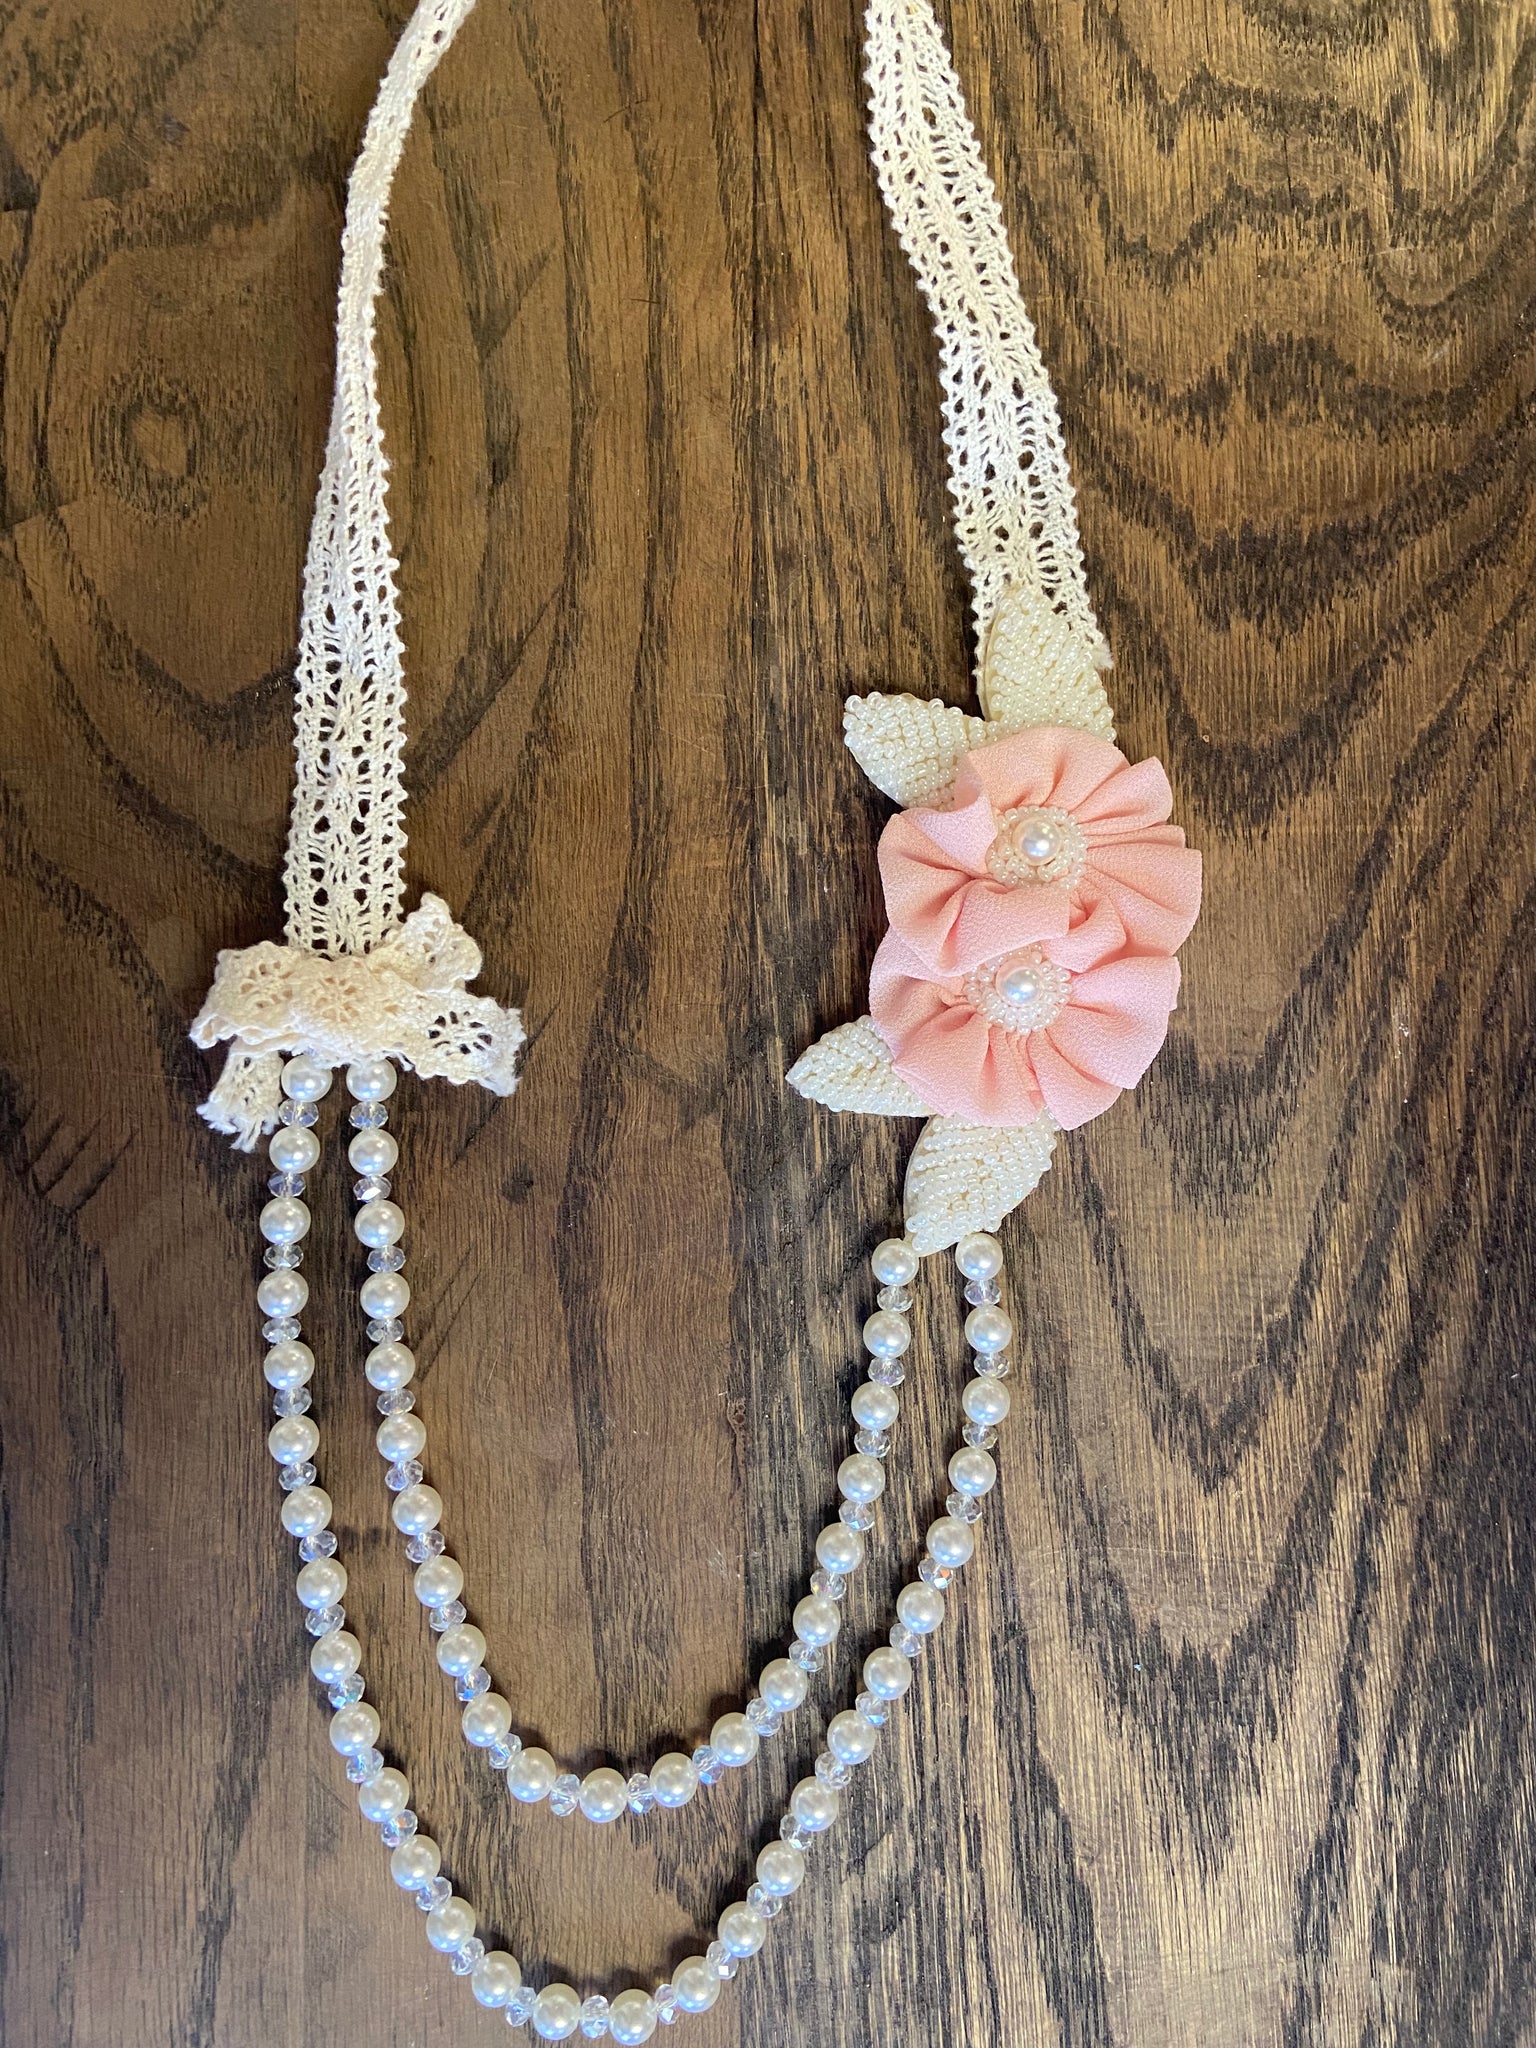 Lace and Pearl Necklaces in Mauve